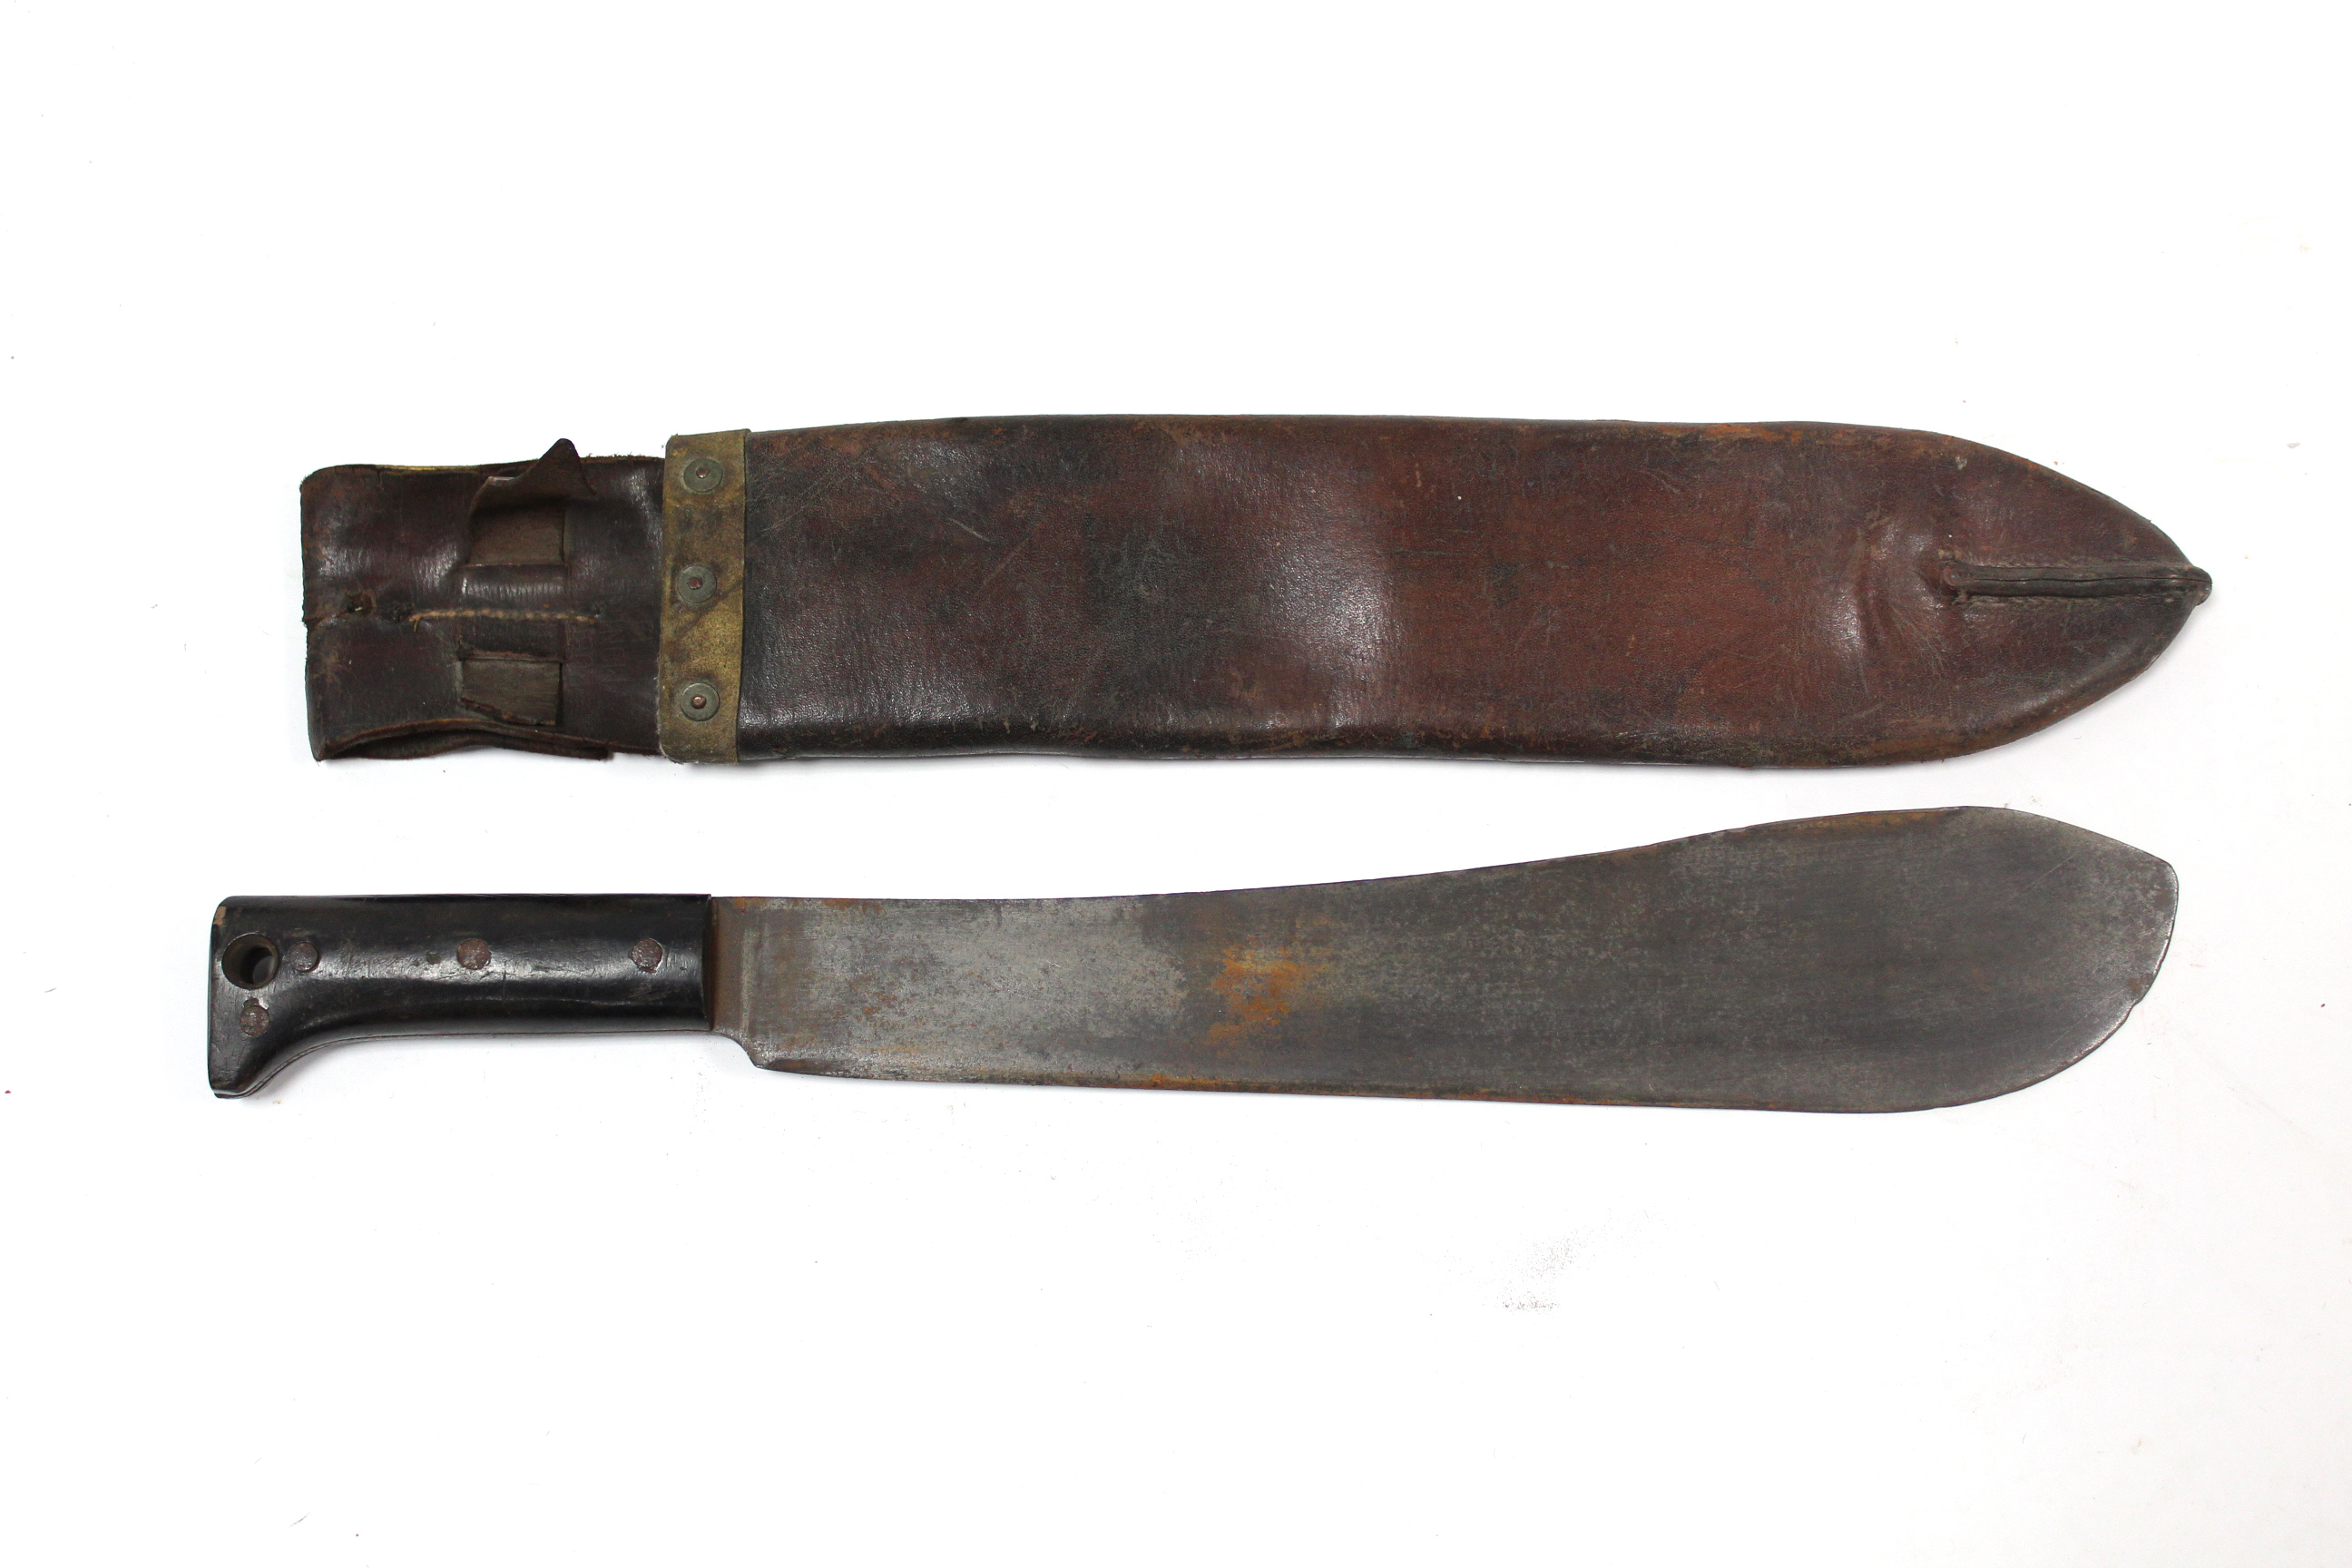 A Dolln’s & Co. (American) machete (No. 1250, 1943) with 14½” long blade & with leather sheath.